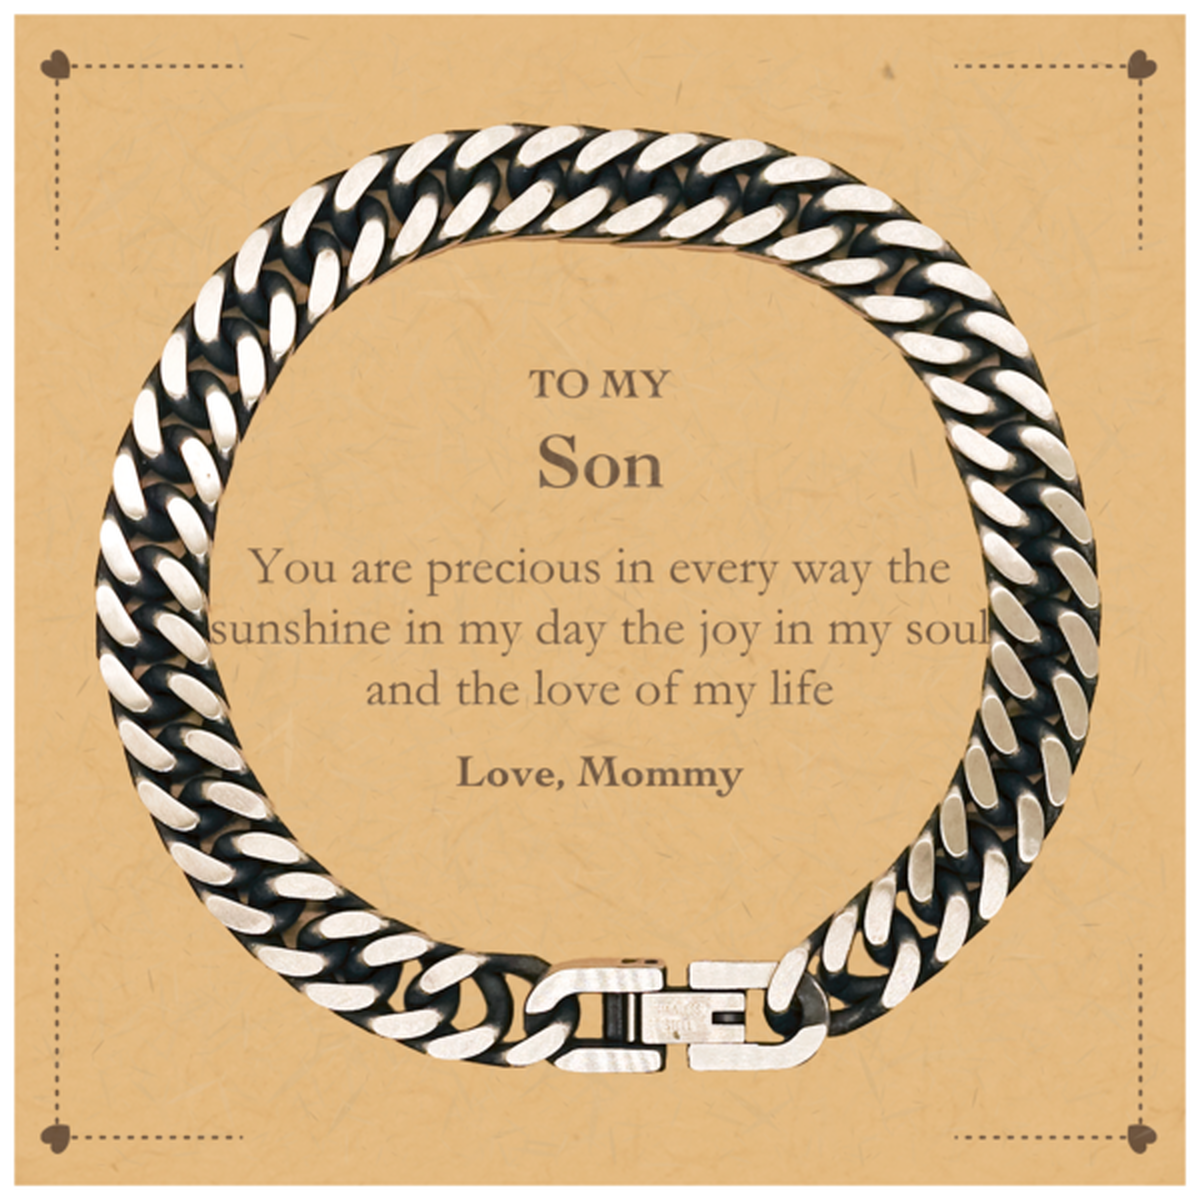 Graduation Gifts for Son Cuban Link Chain Bracelet Present from Mommy, Christmas Son Birthday Gifts Son You are precious in every way the sunshine in my day. Love, Mommy